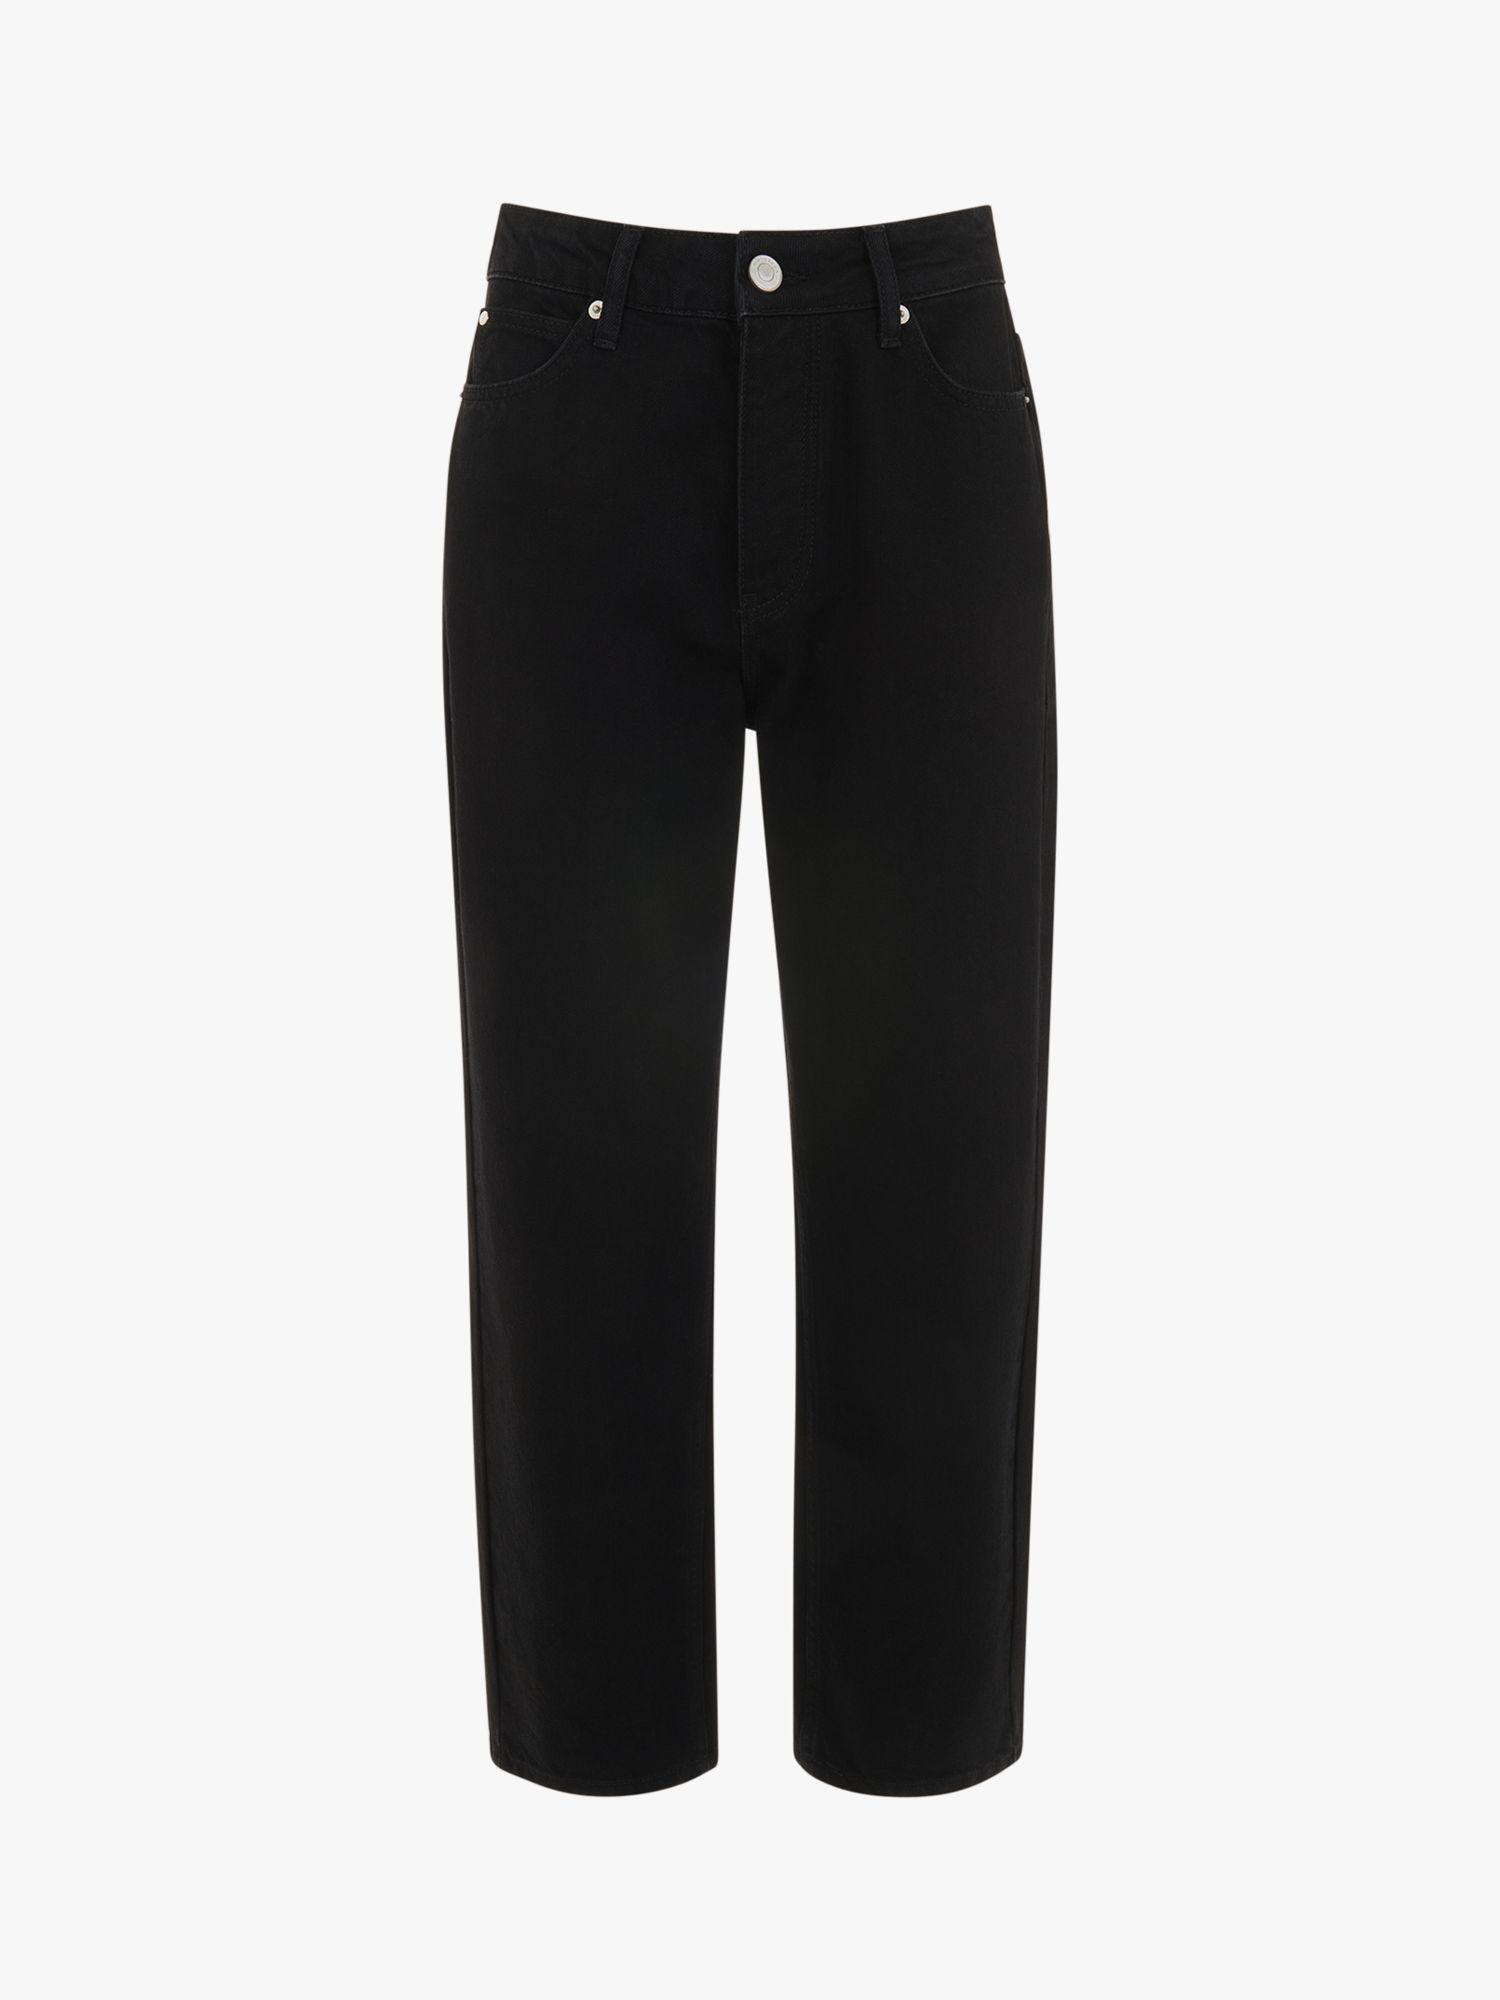 Buy Whistles Authentic Mollie Straight Jeans Online at johnlewis.com